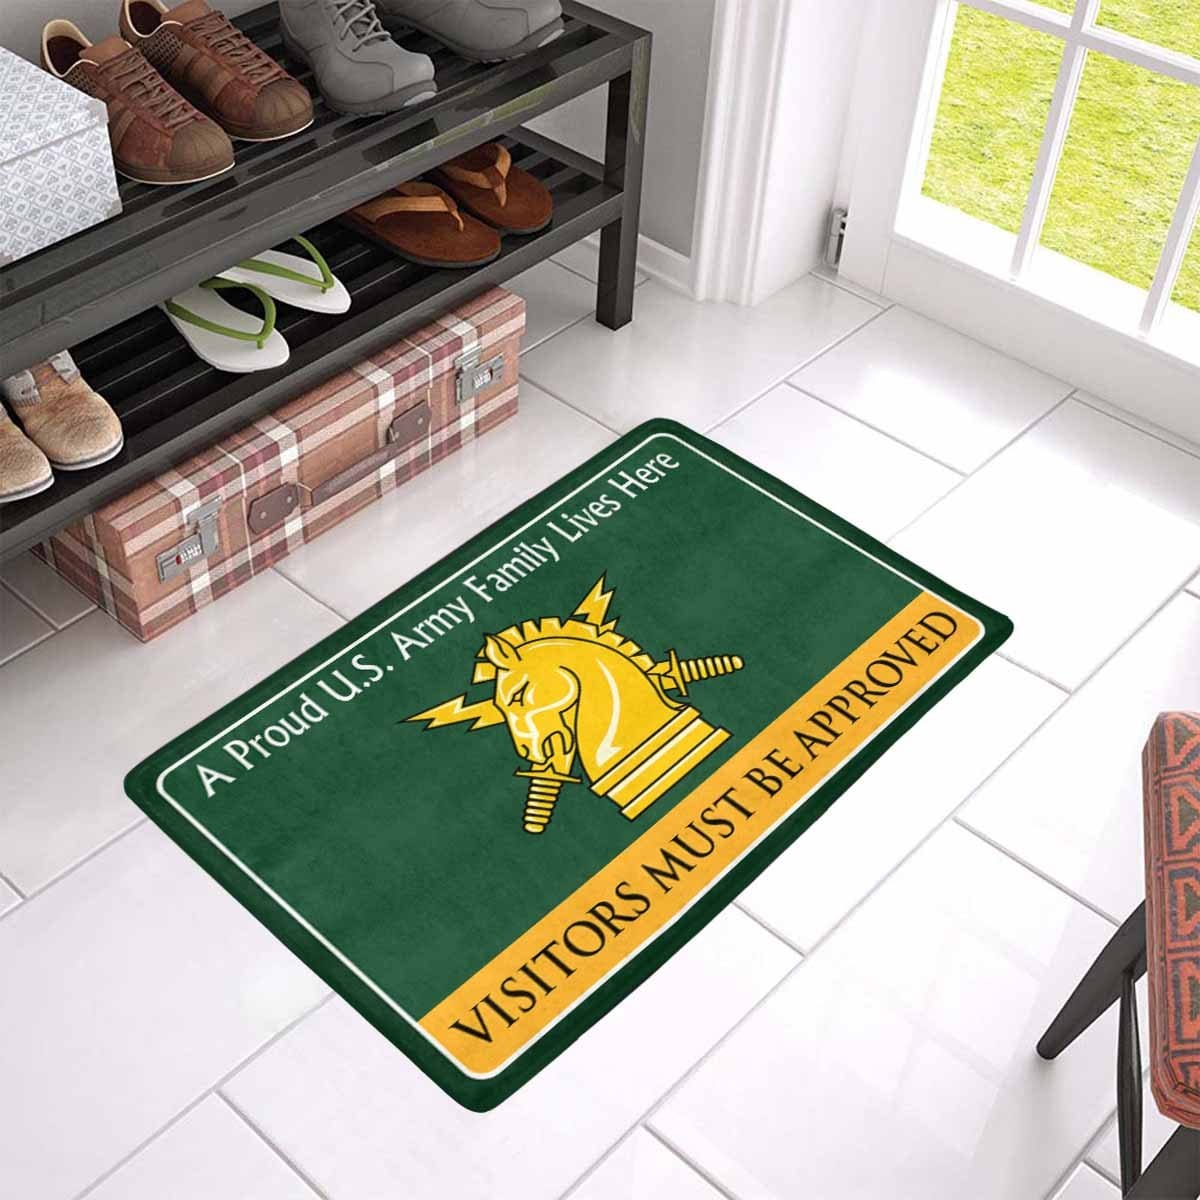 US Army Psychological Ops Family Doormat - Visitors must be approved Doormat (23.6 inches x 15.7 inches)-Doormat-Army-Branch-Veterans Nation